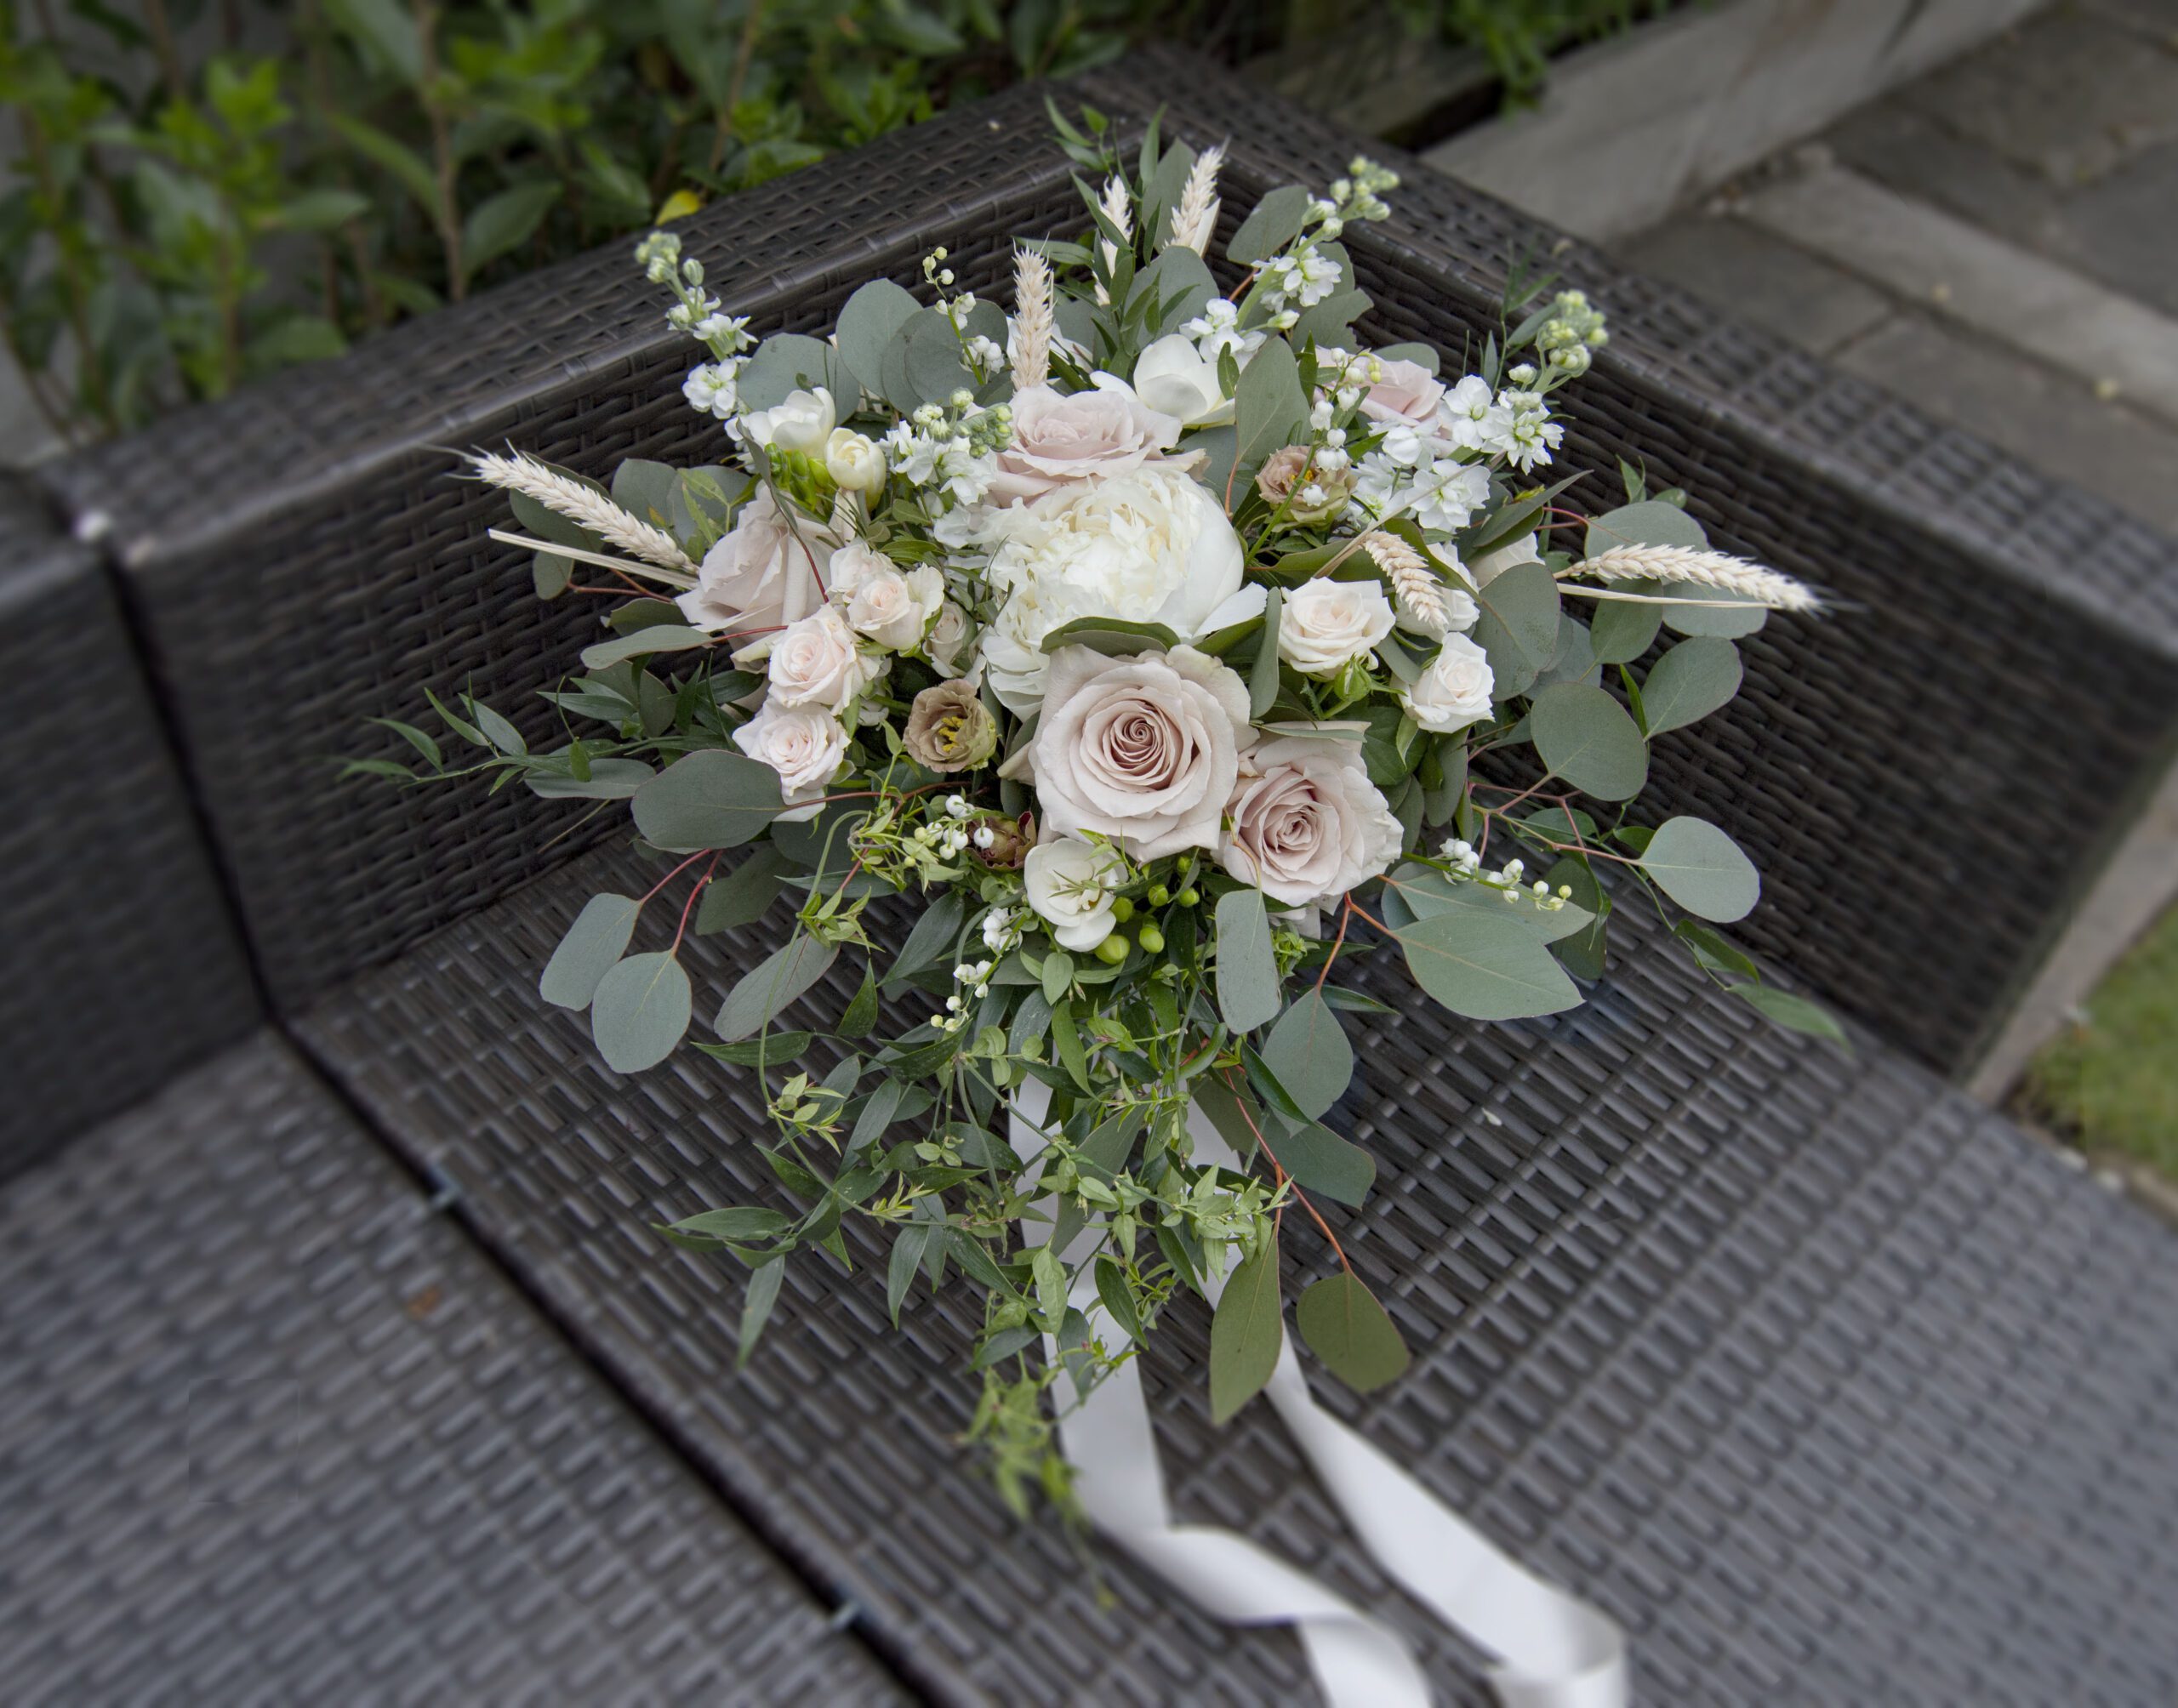 nude-and-cream-peonies-roses-bridal-bouquet--scaled Grid No Space 4 Columns